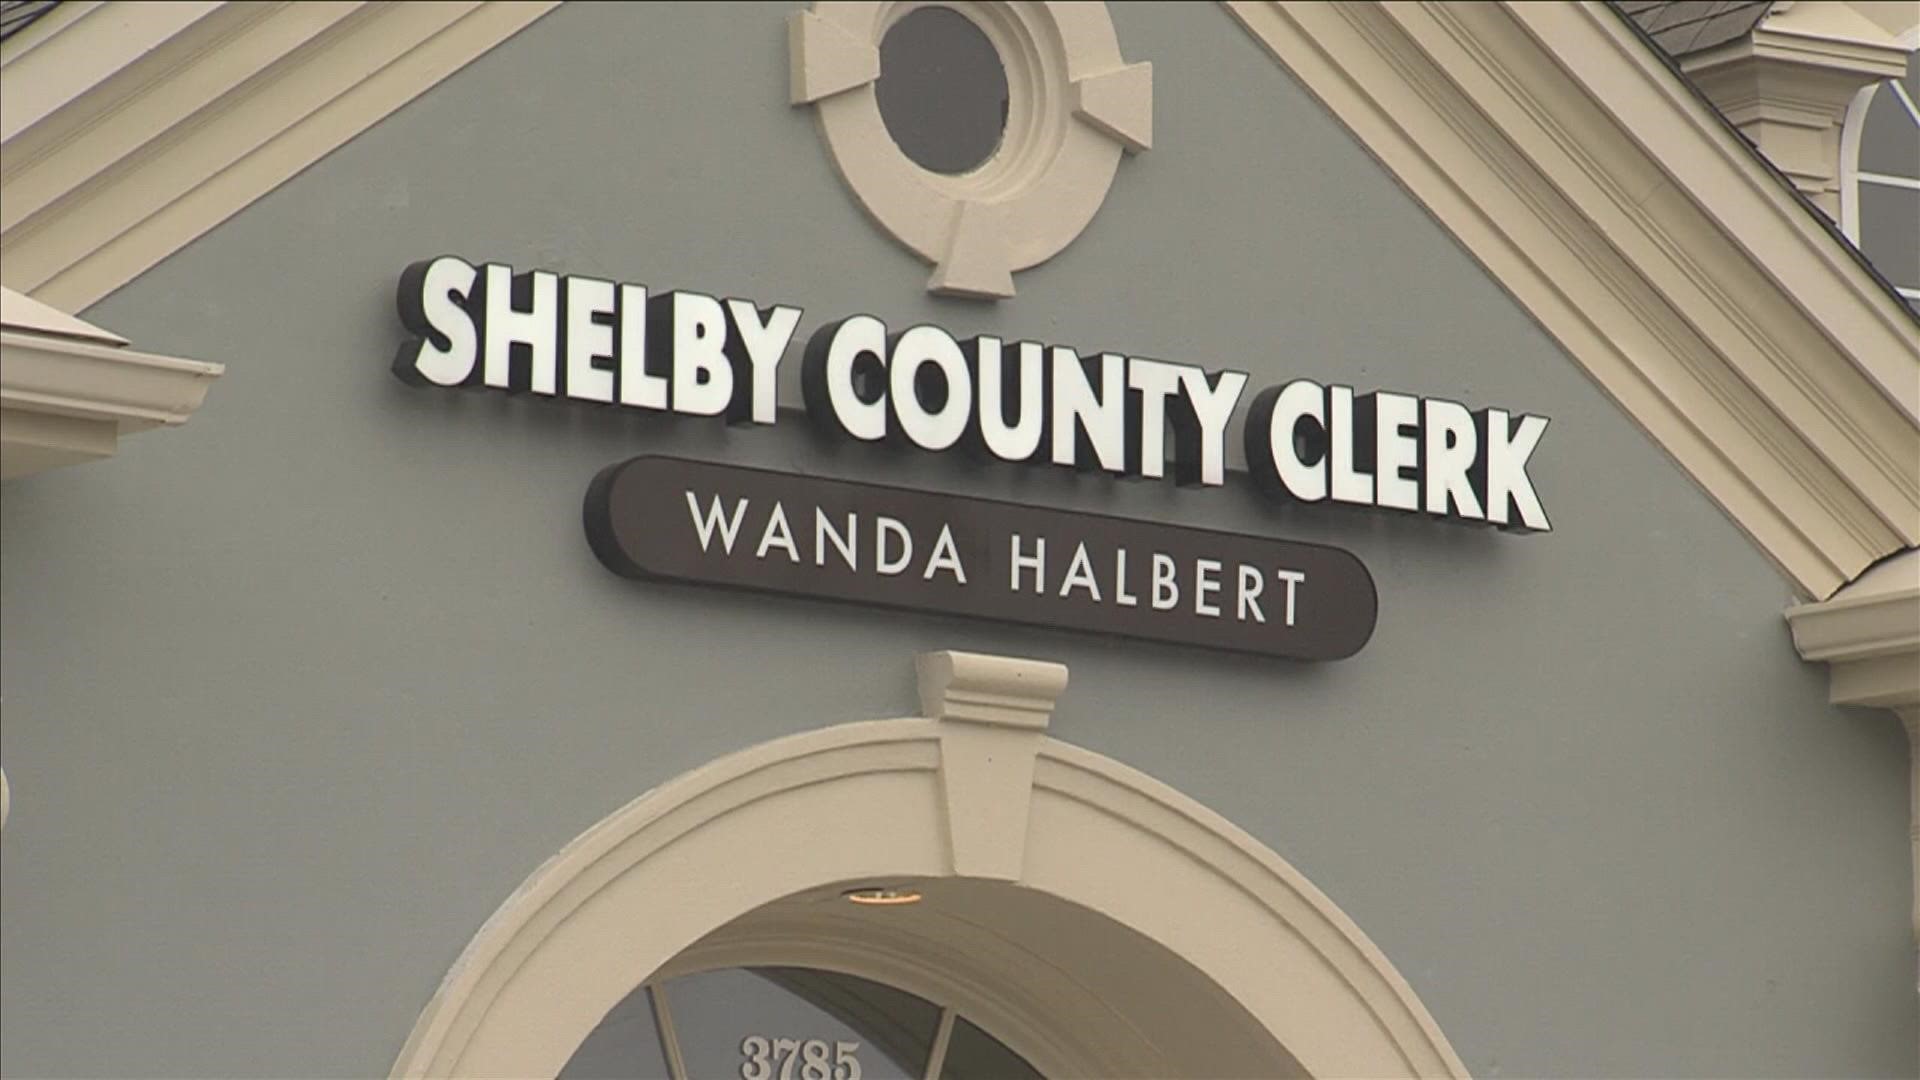 Shelby County Clerk Wanda Halbert said the location on Riverdale Road will open once her team addresses local, state and federal facility needs.